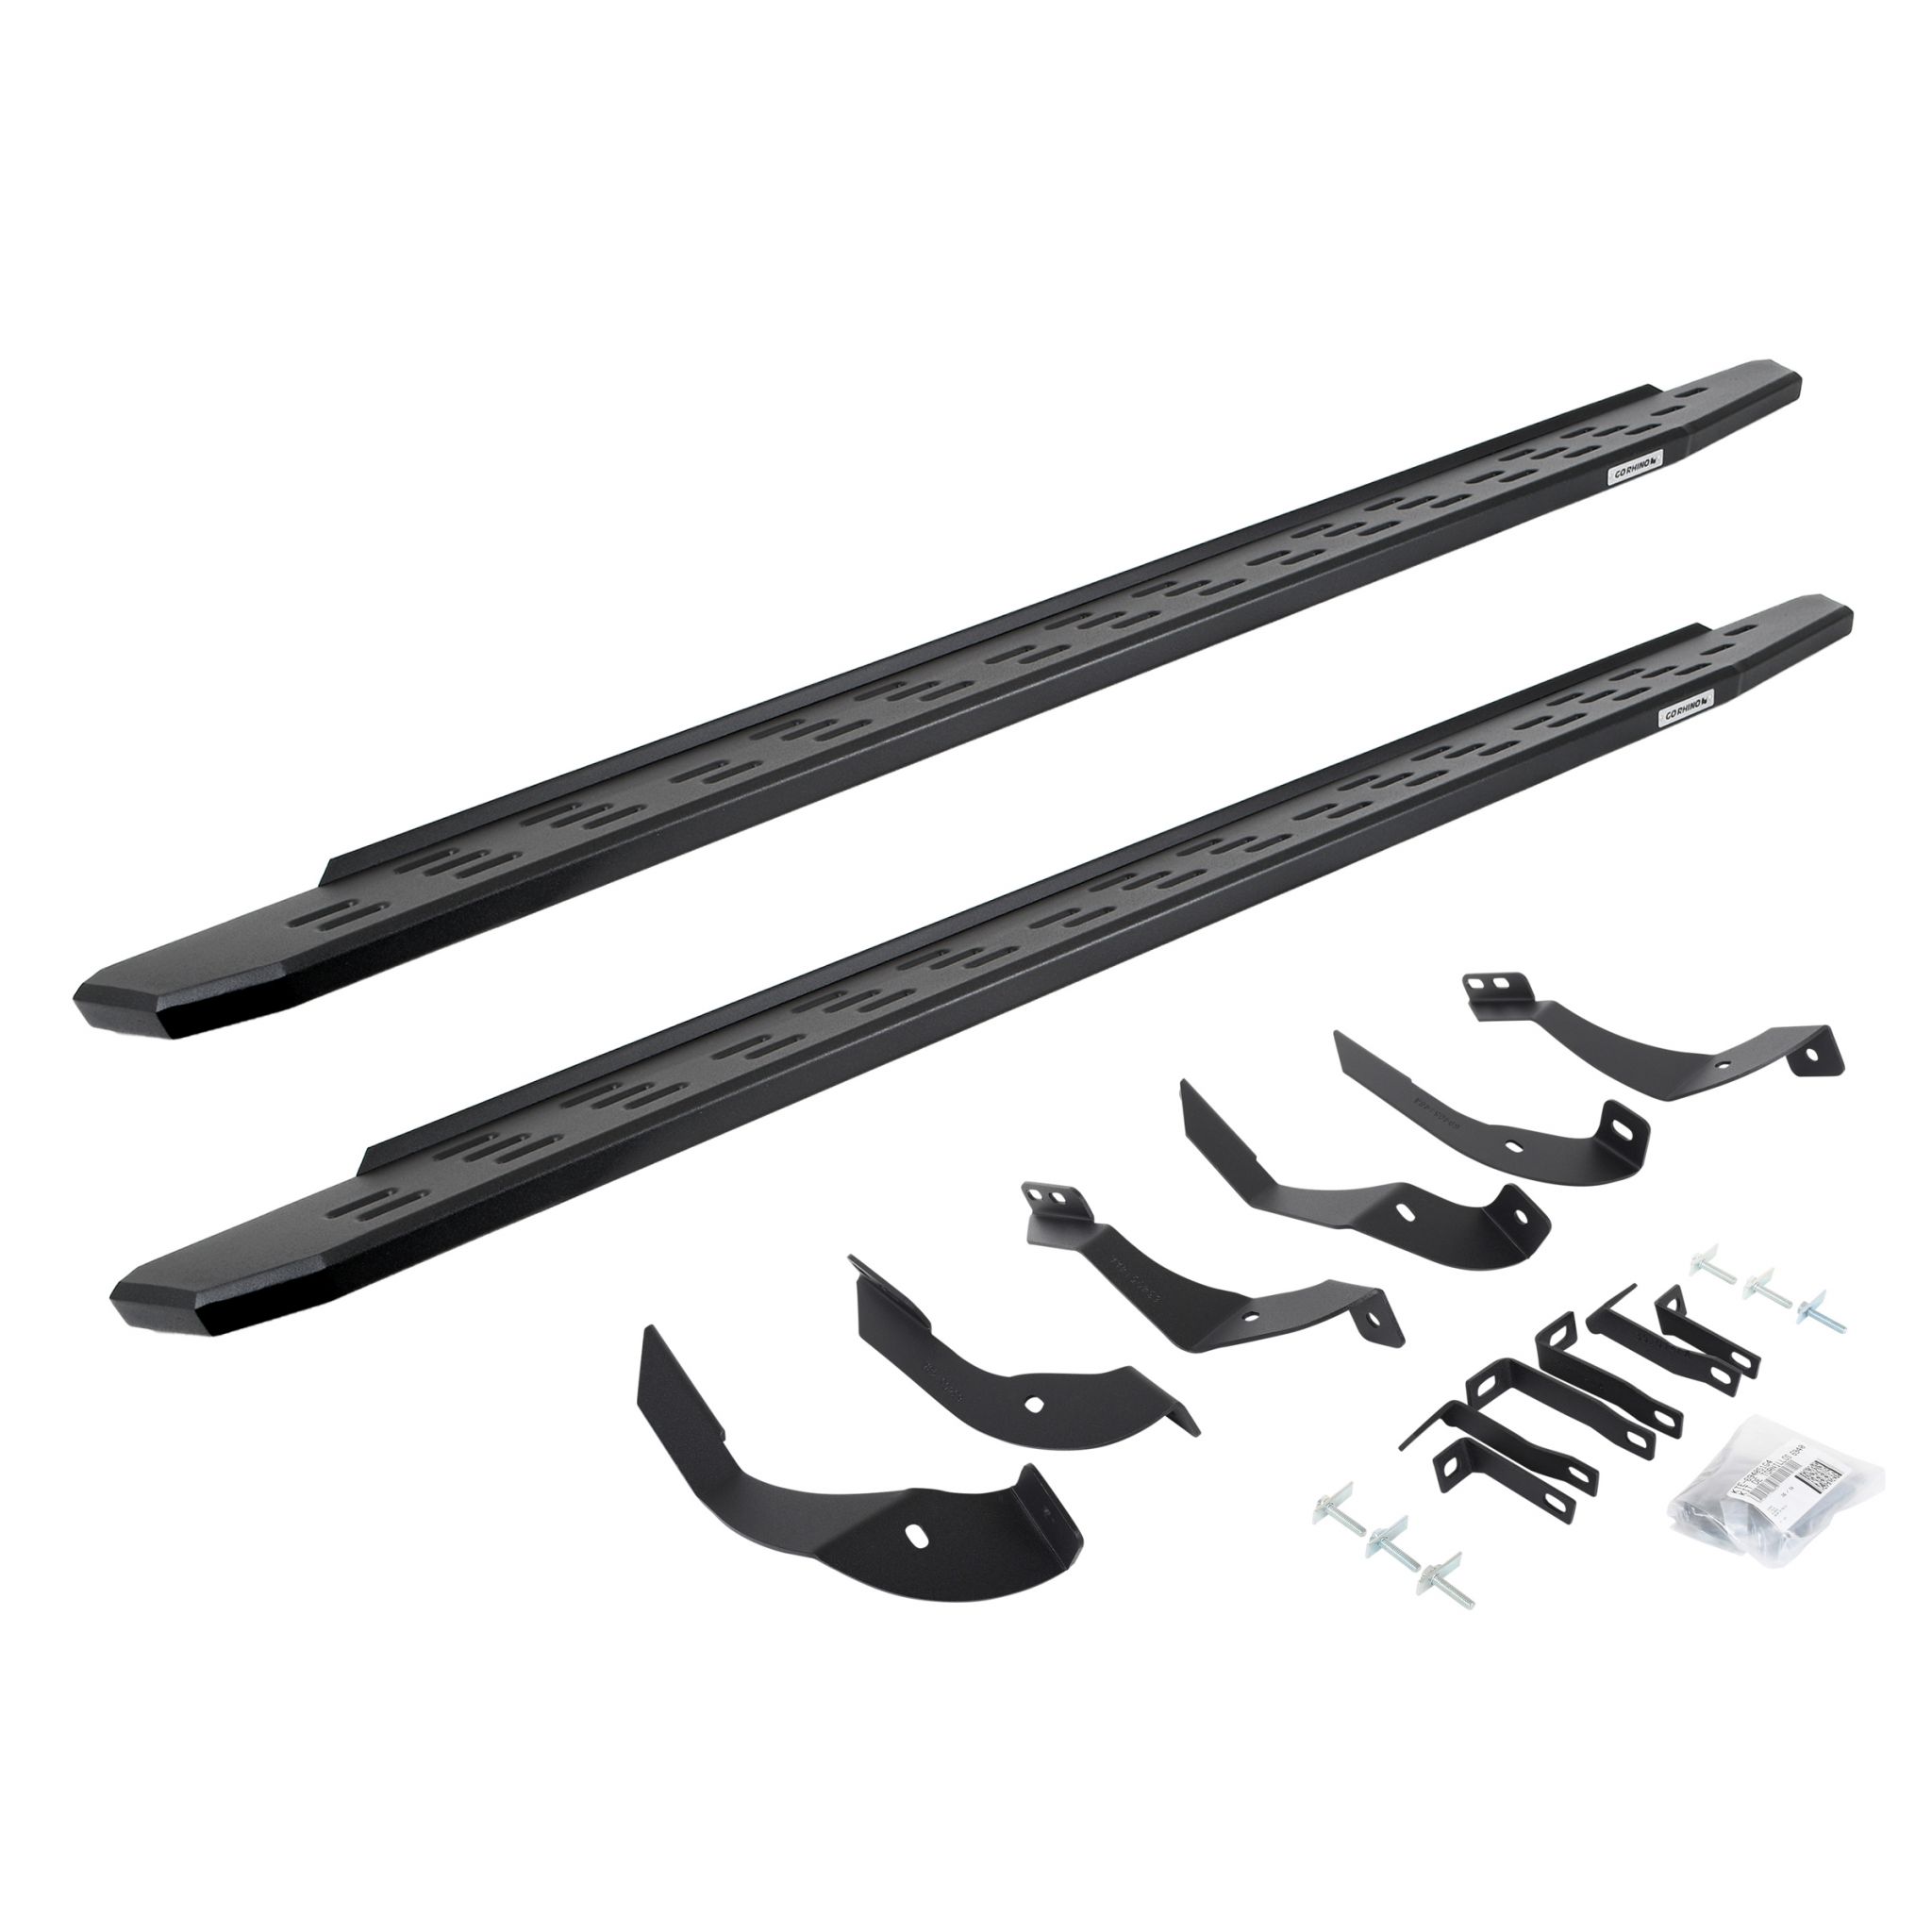 Go Rhino 69605187PC - RB30 Running Boards with Mounting Bracket Kit - Textured Black